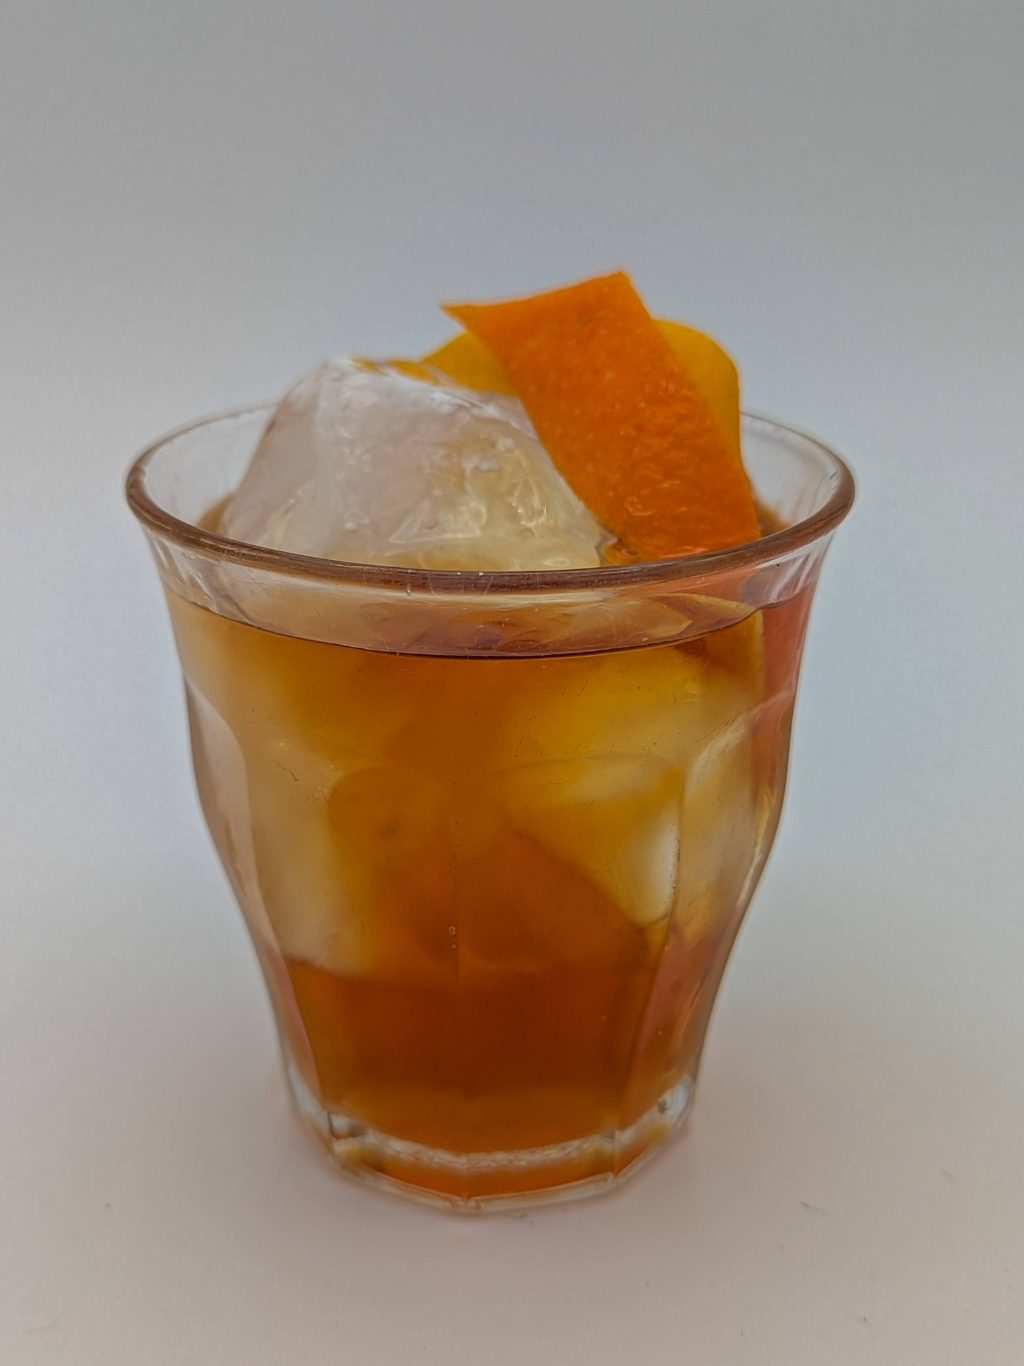 Amber liquid and a large ice cube in an old fashioned glass with a lemon and orange peel garnish